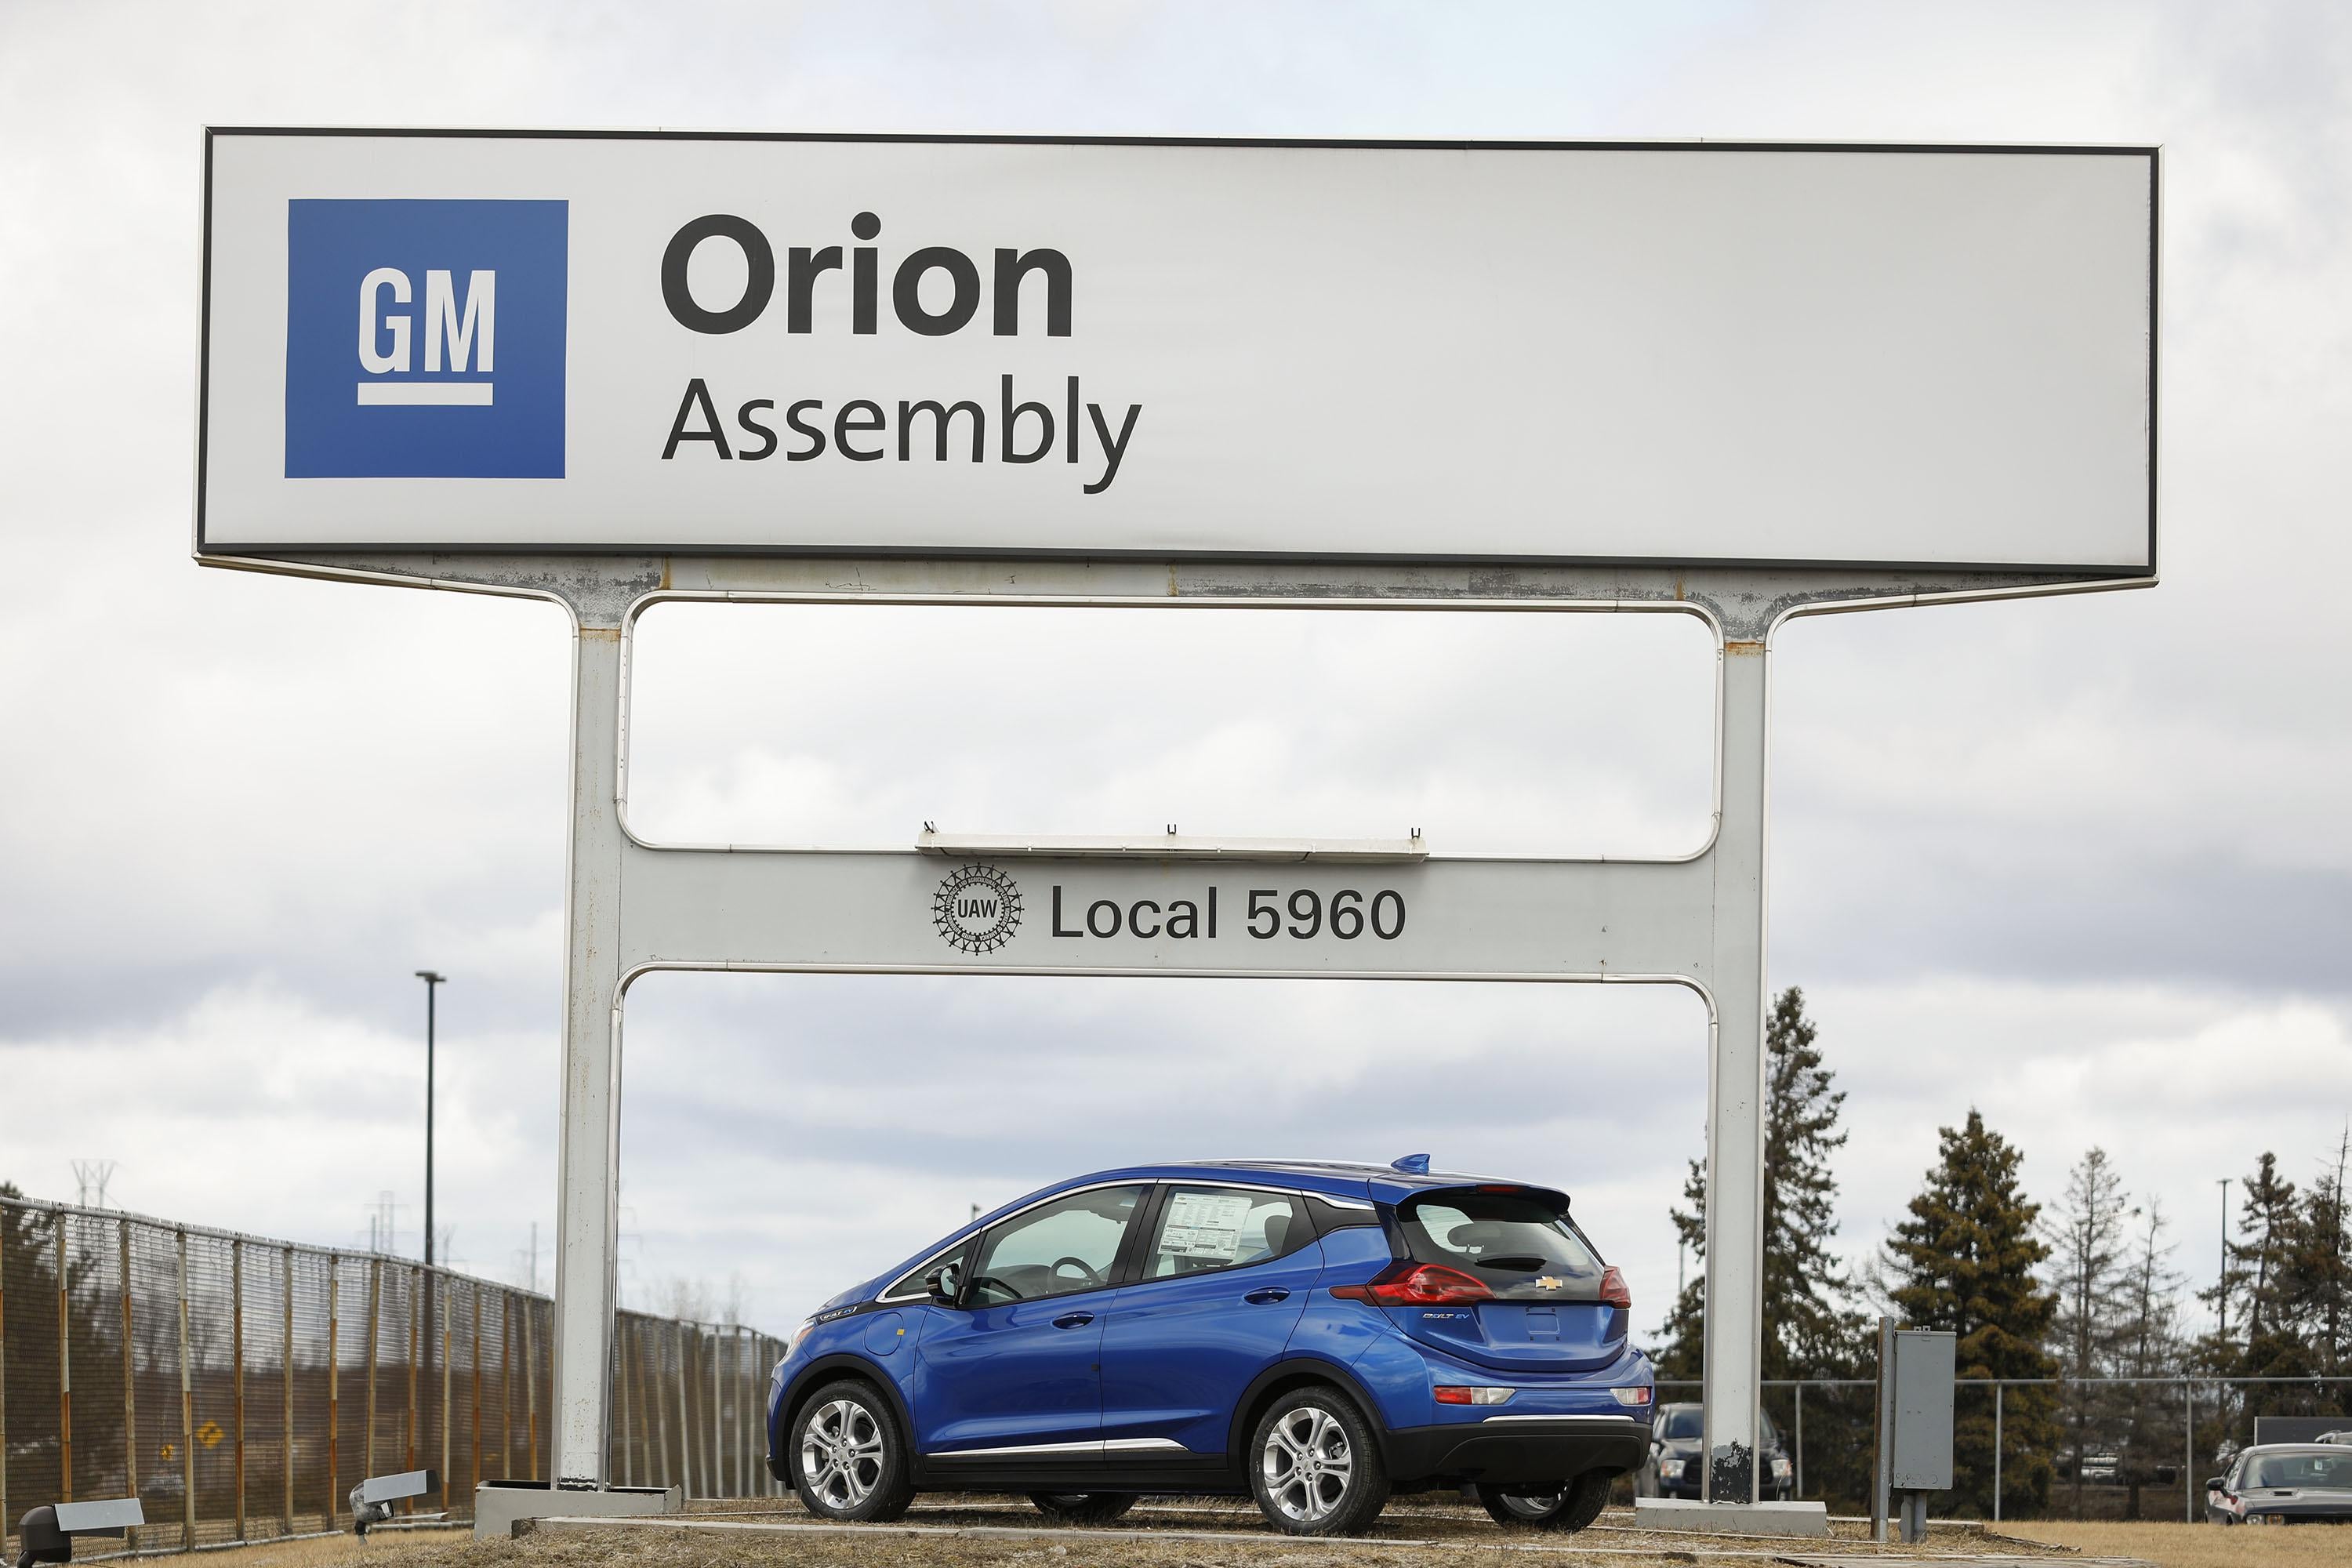 A blue electric vehicle is parked below the General Motors Orion Assembly plant sign.